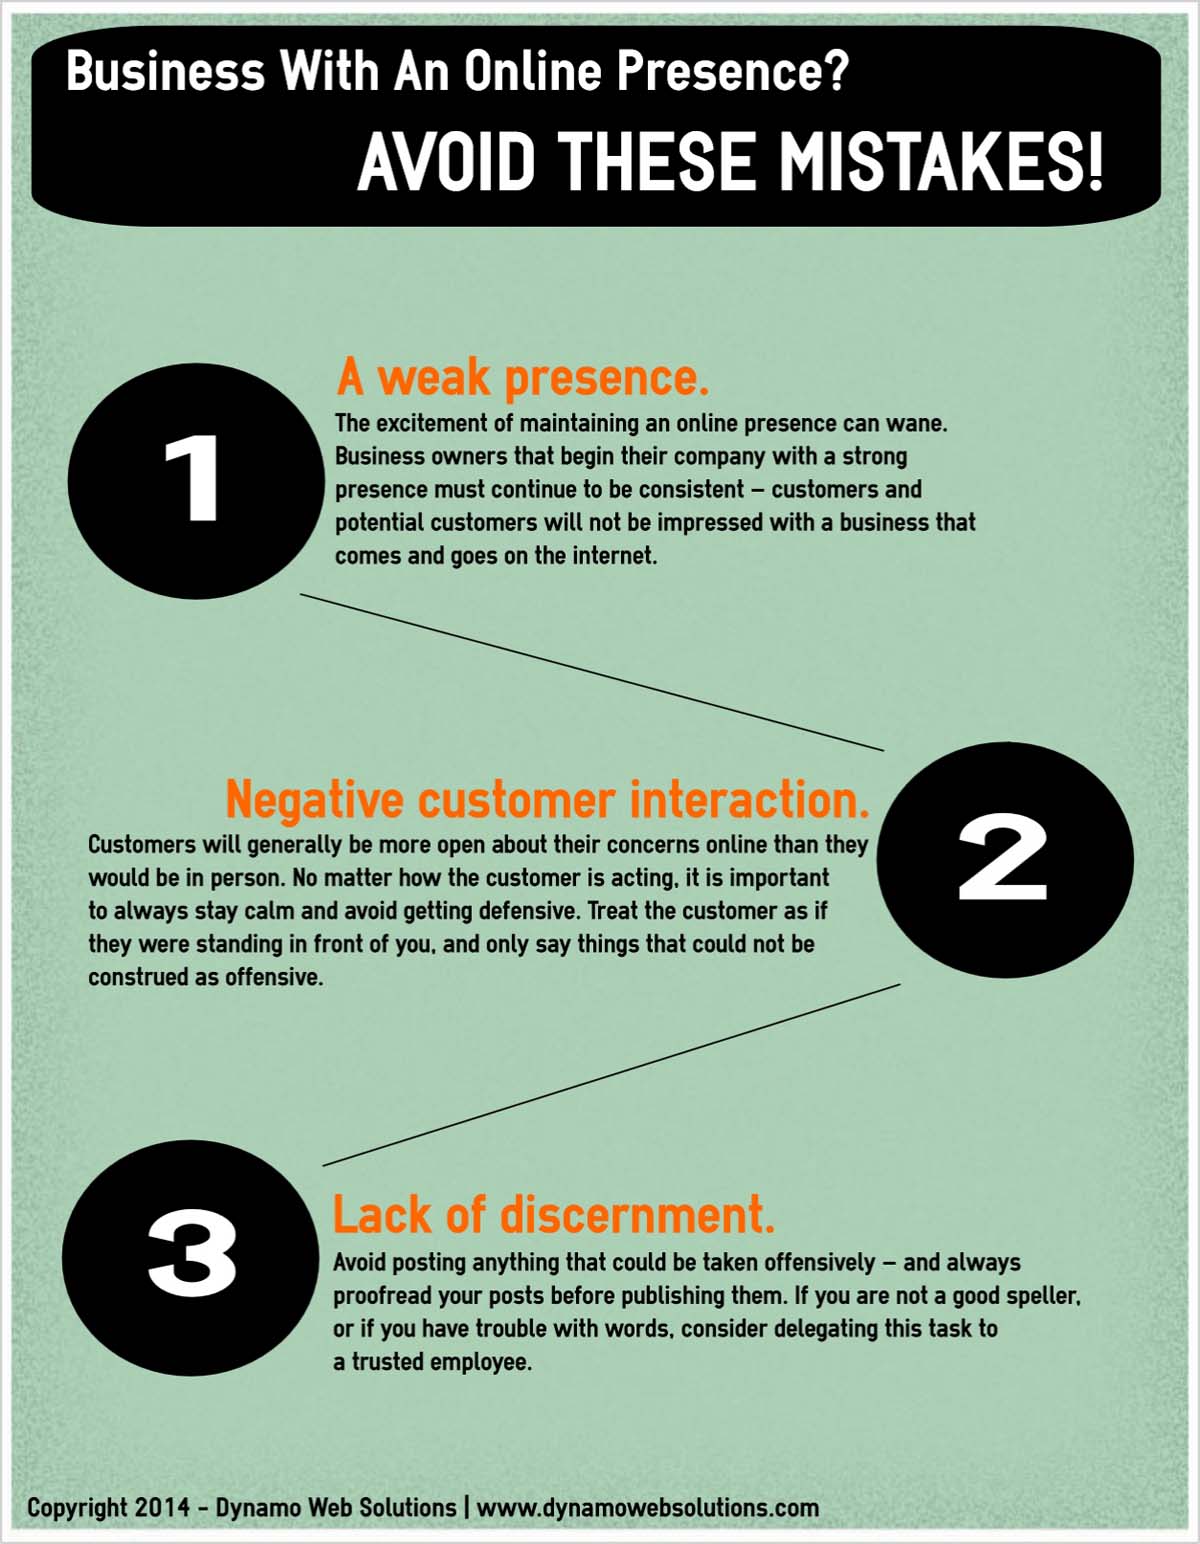 Online Presence Mistakes by Dynamo Web Solutions IG - Infographics